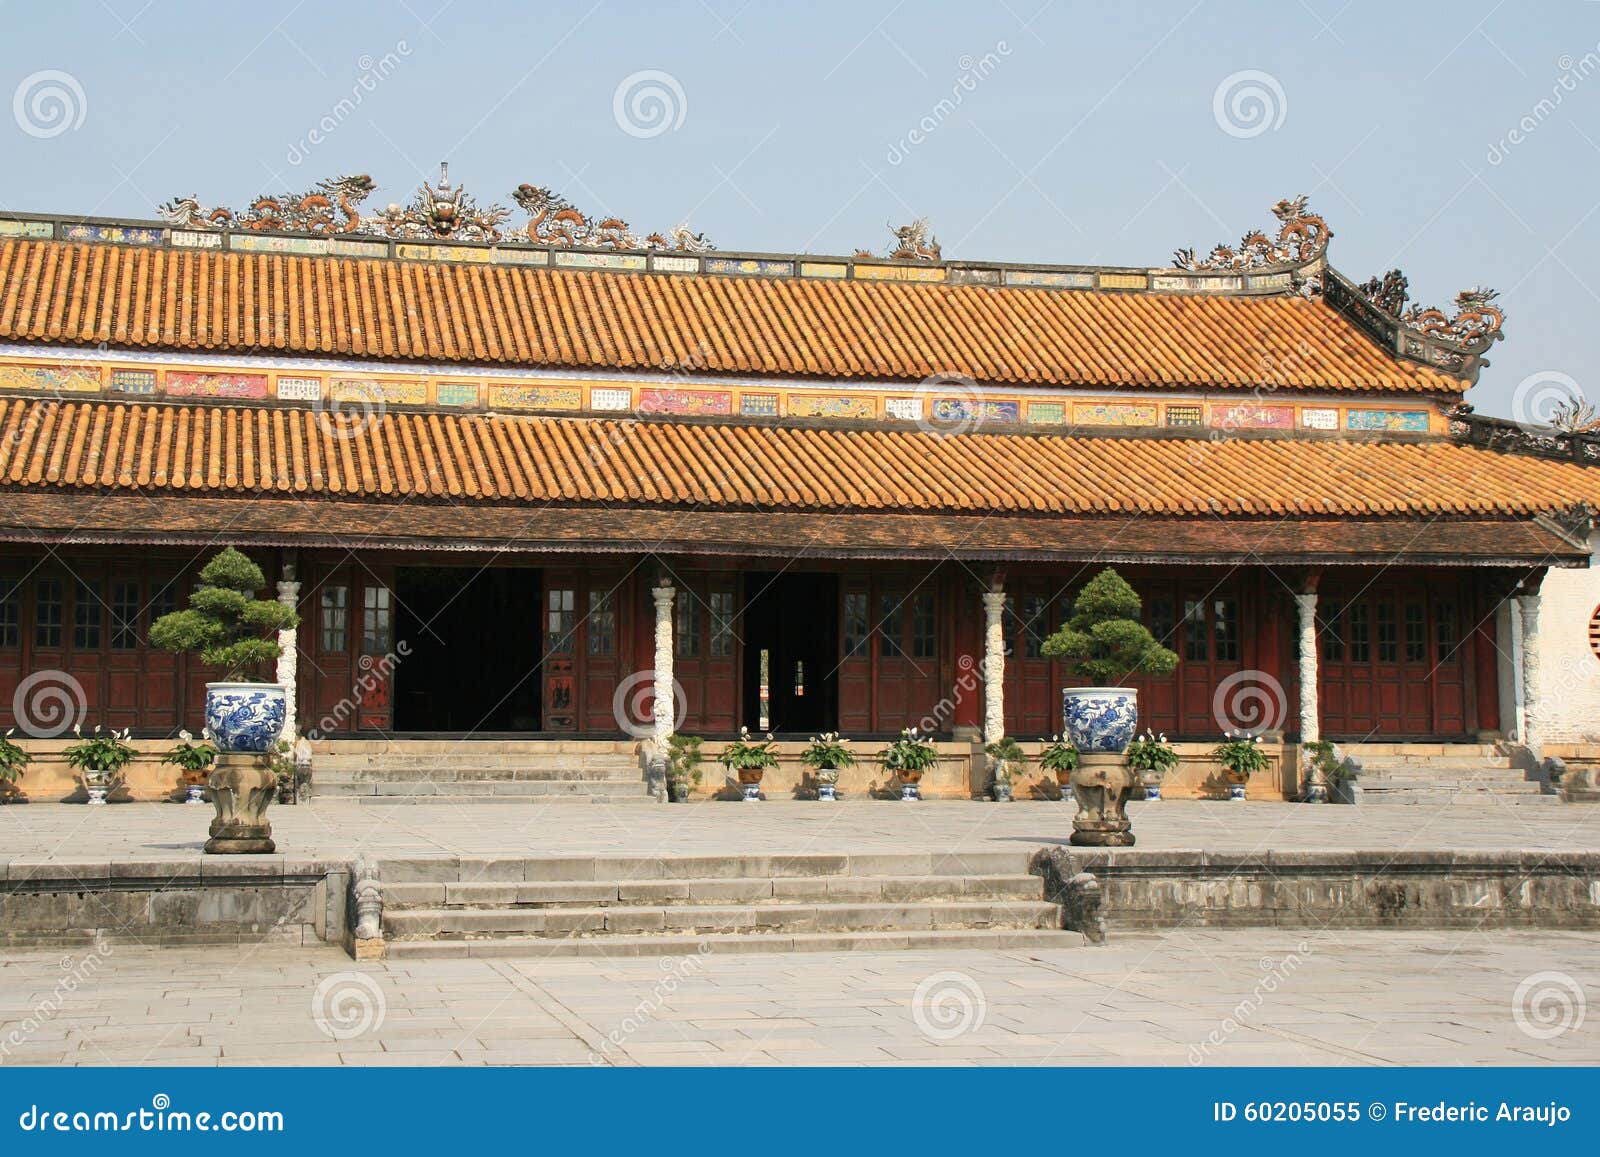 a building in the imperial city of hue, vietnam